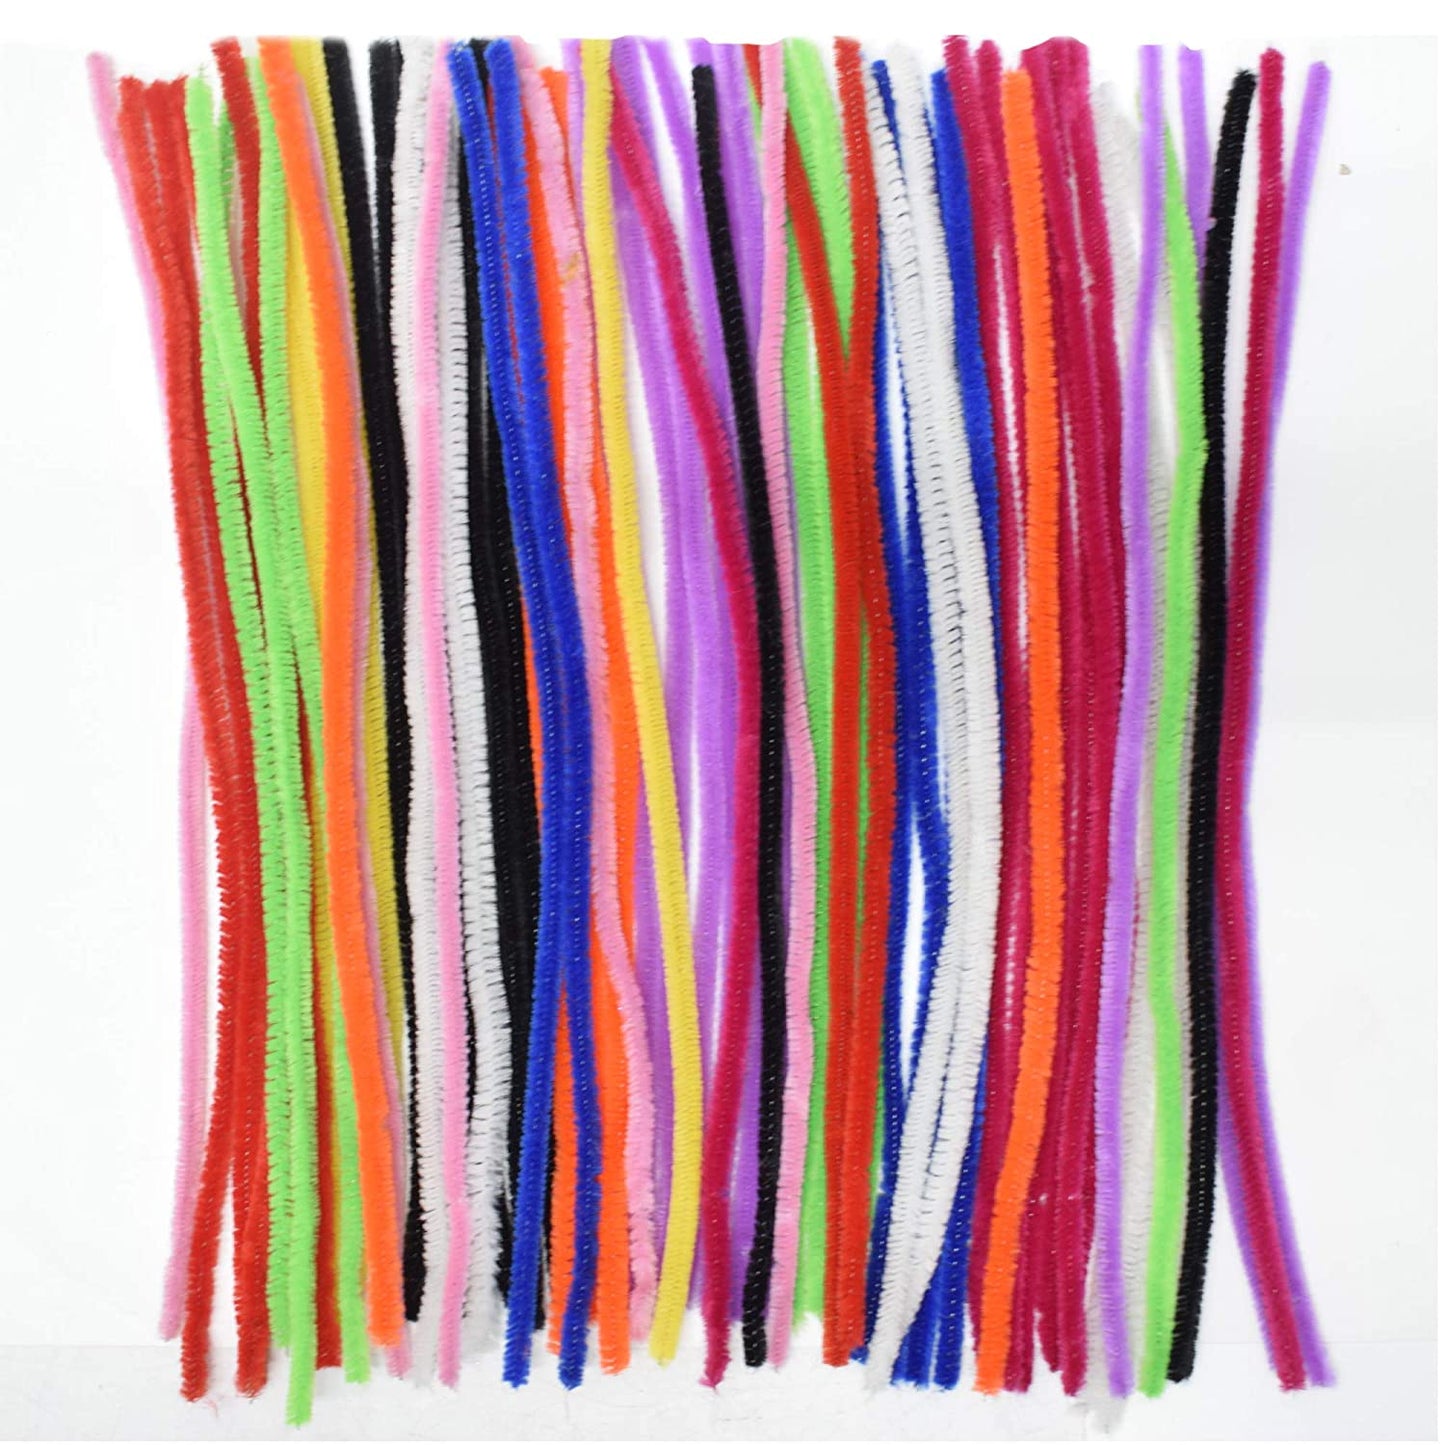 Craft Pipe Cleaner Multi Color, Pack of 100 Pieces 12 Inches